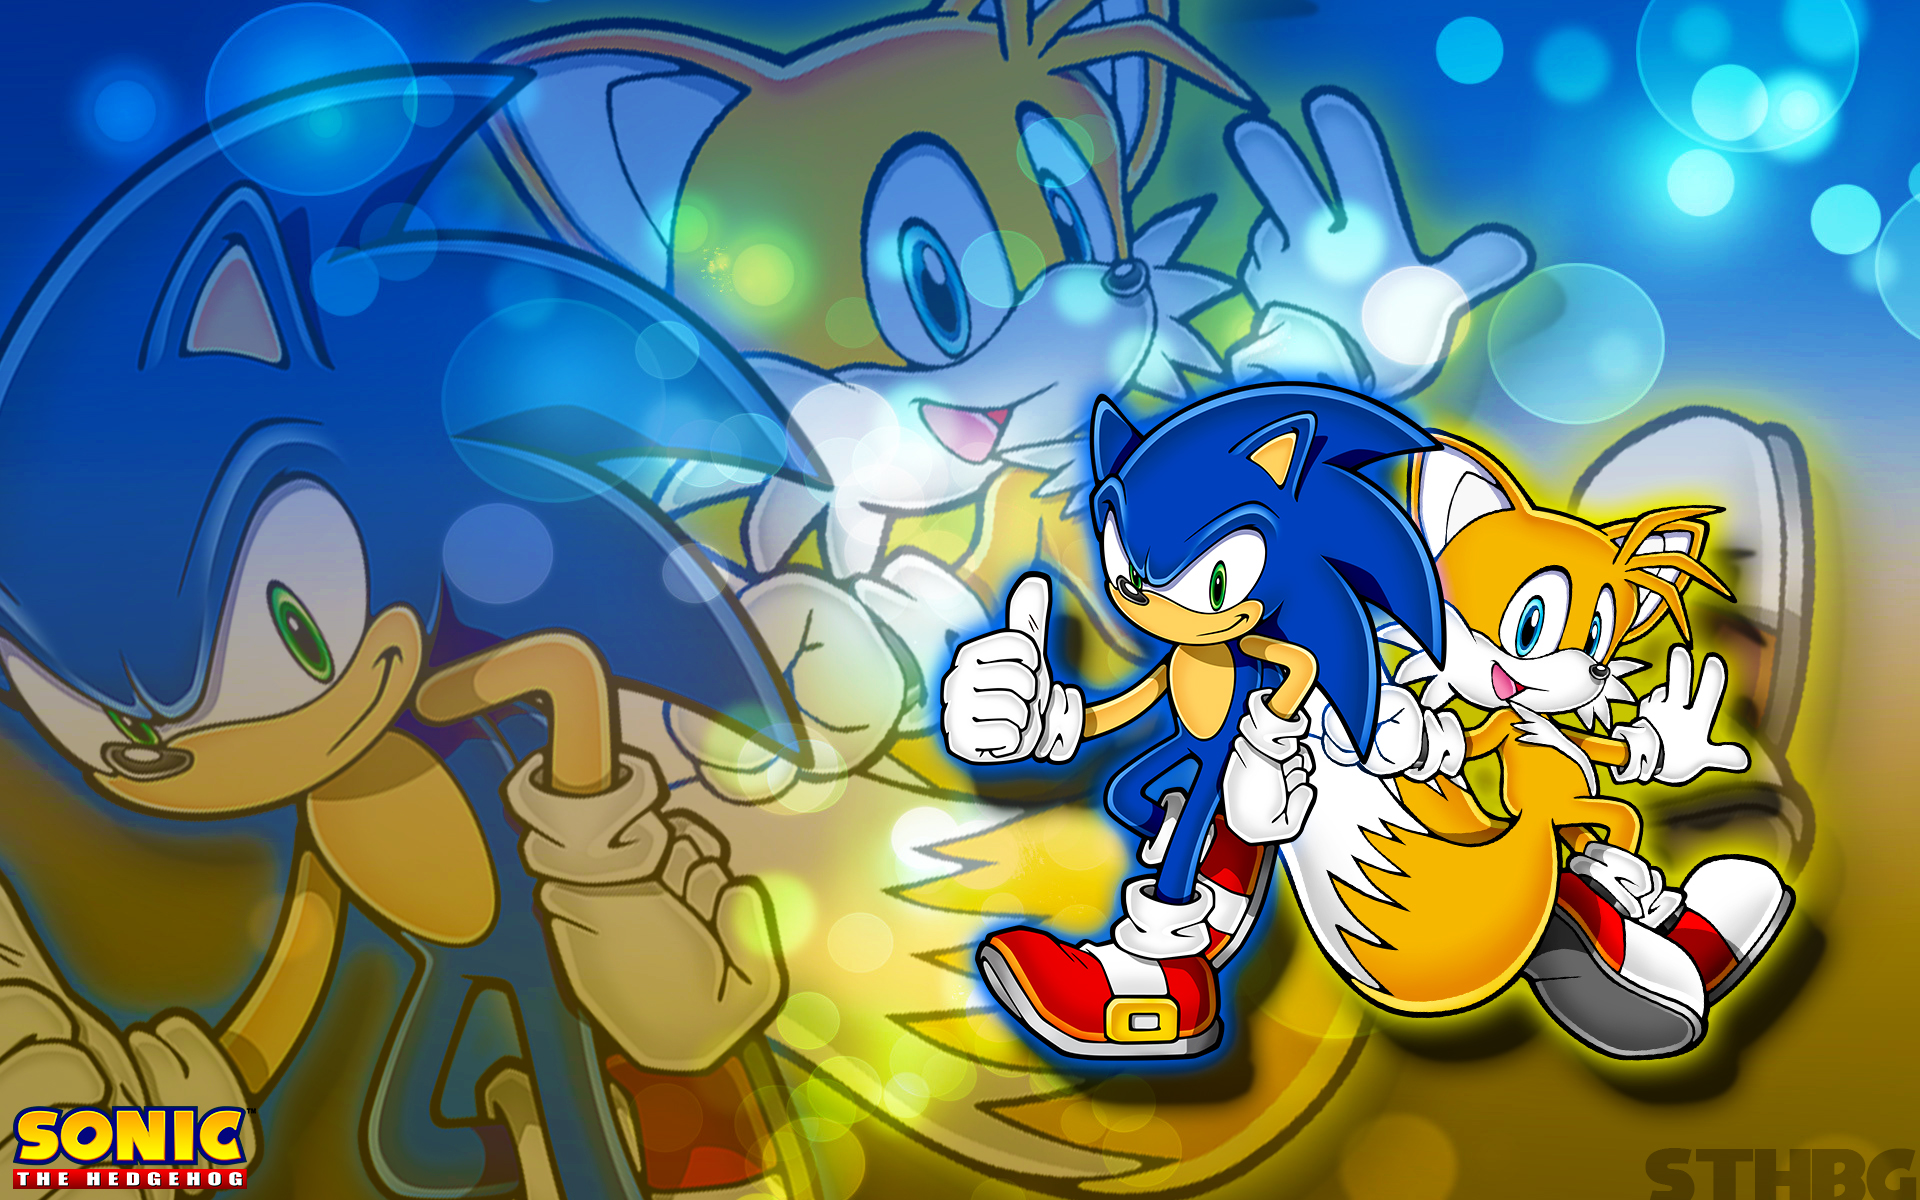 HD wallpaper Sonic the Hedgehog Tails character Sonic the Hedgehog 4  Episode II  Wallpaper Flare